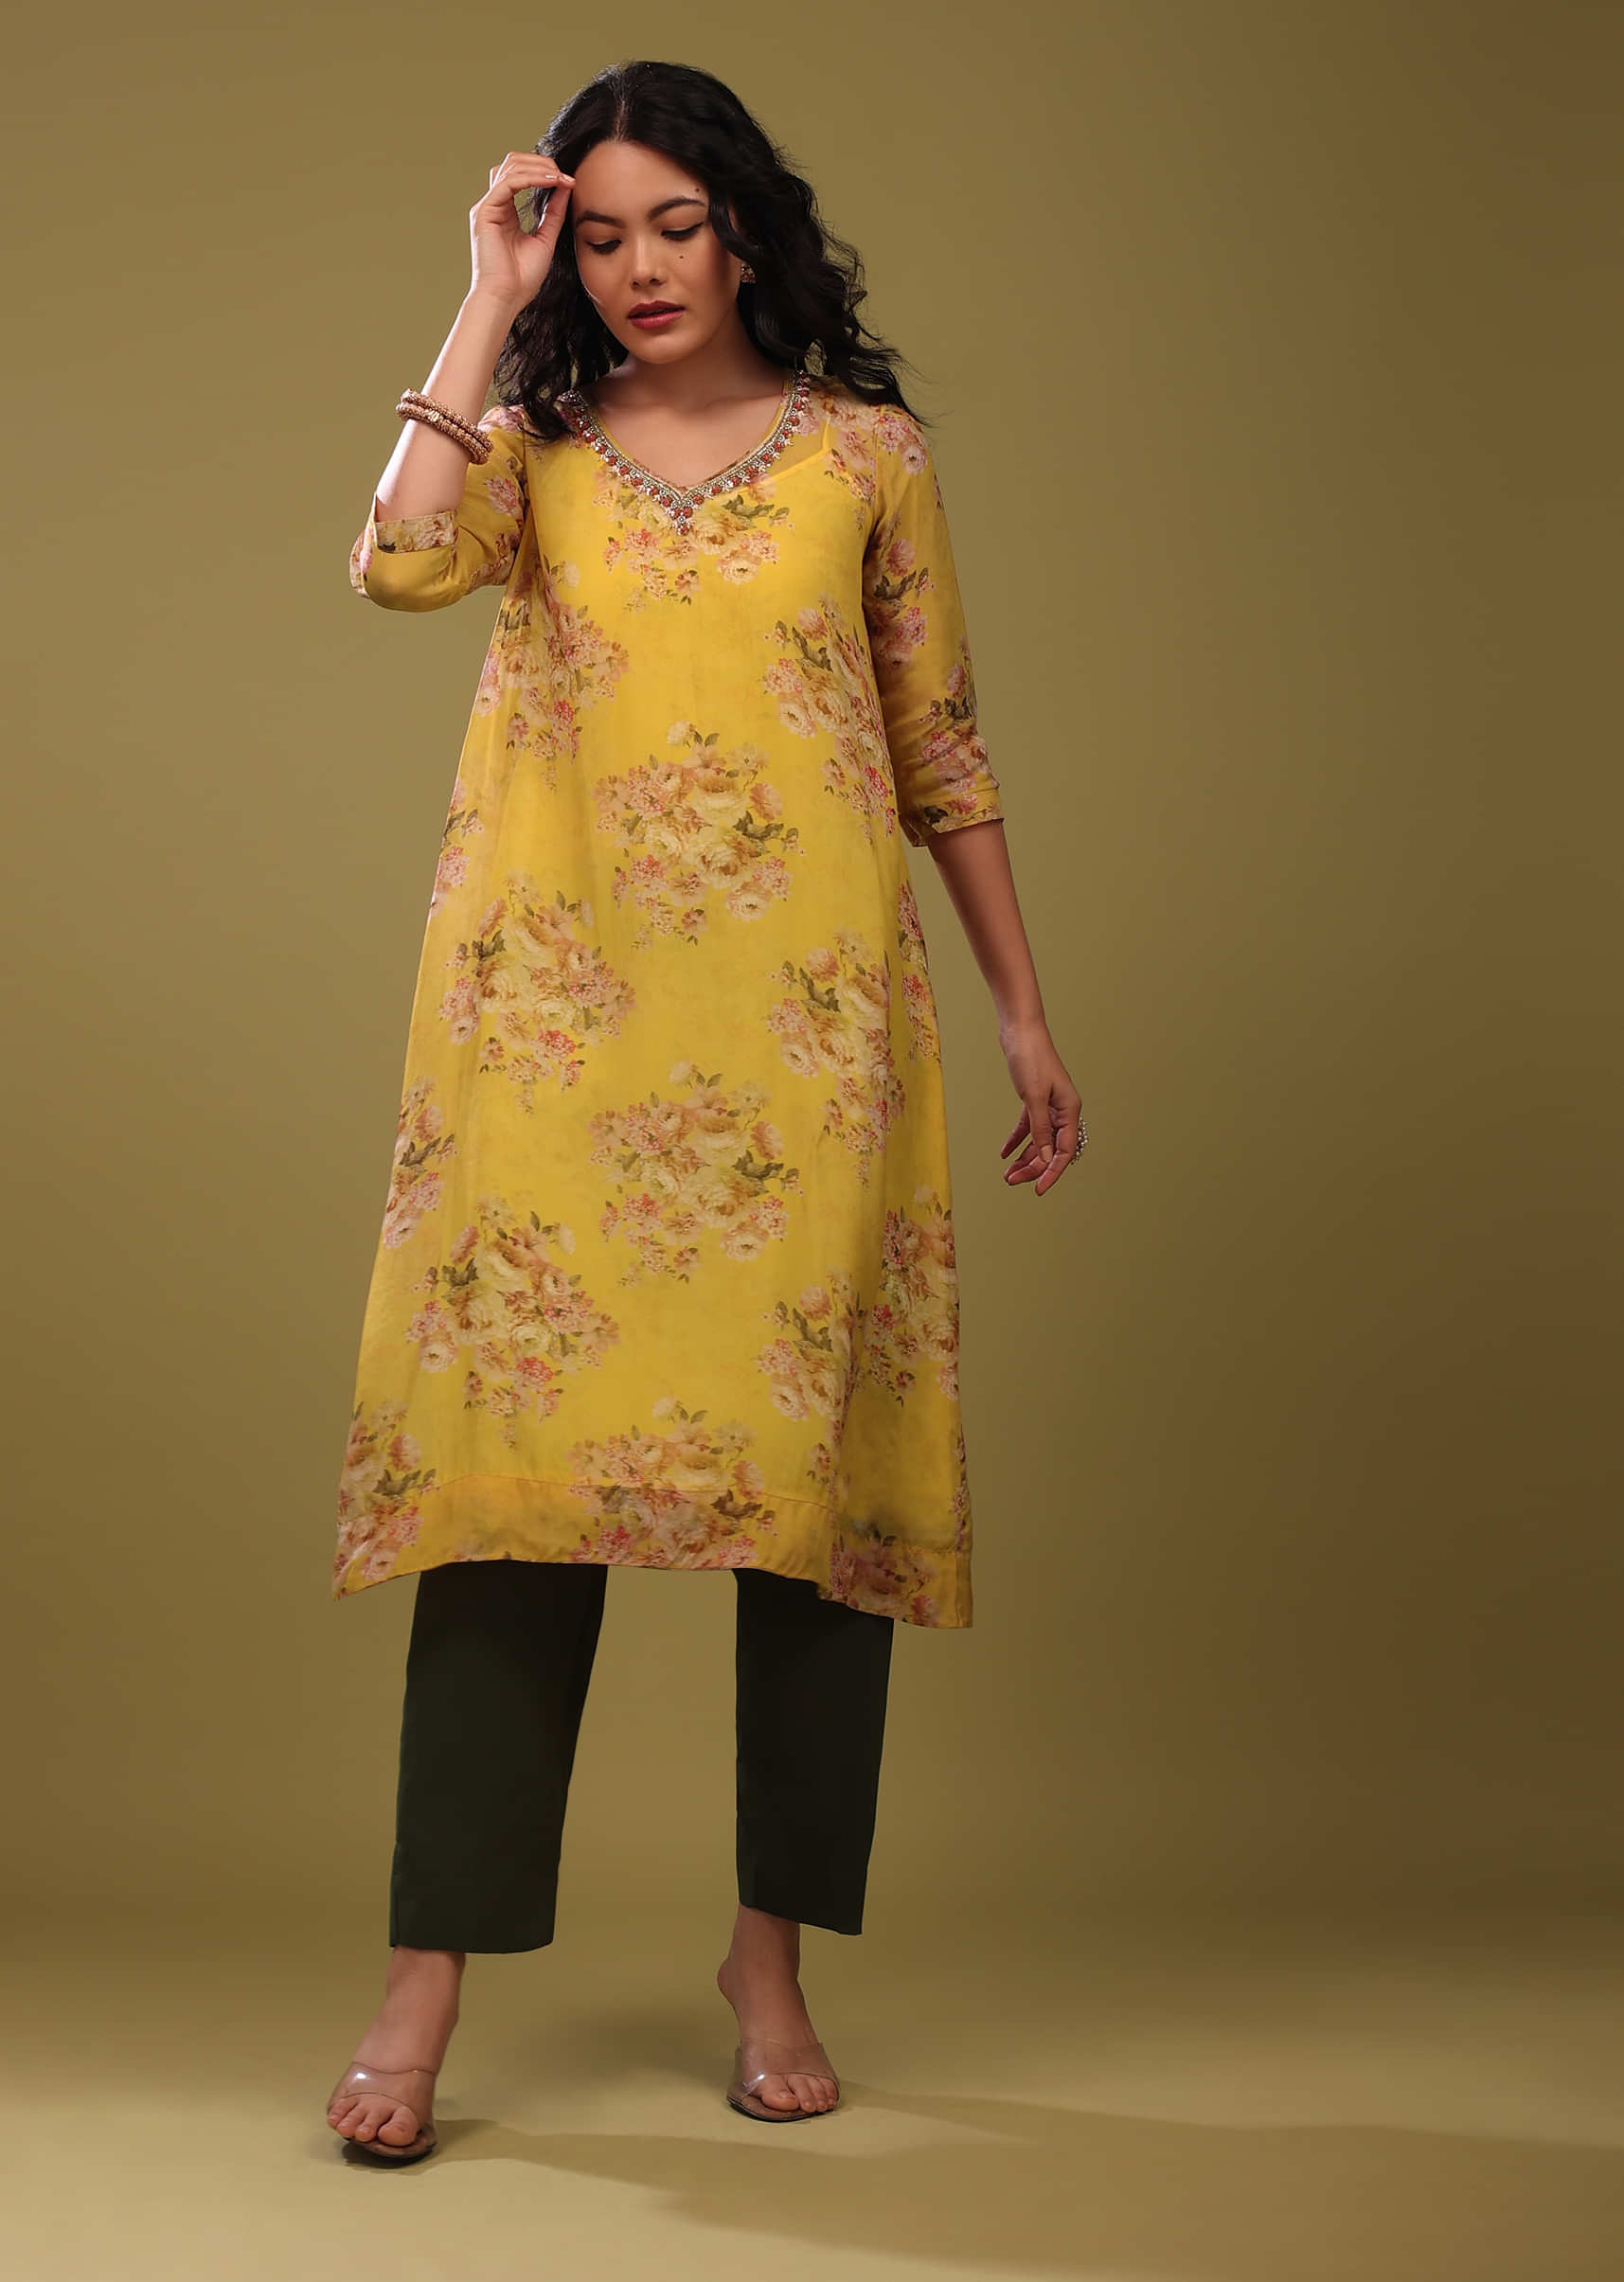 Kalki Freesia Yellow Palazzo Suit In Organza With Vintage Floral Print